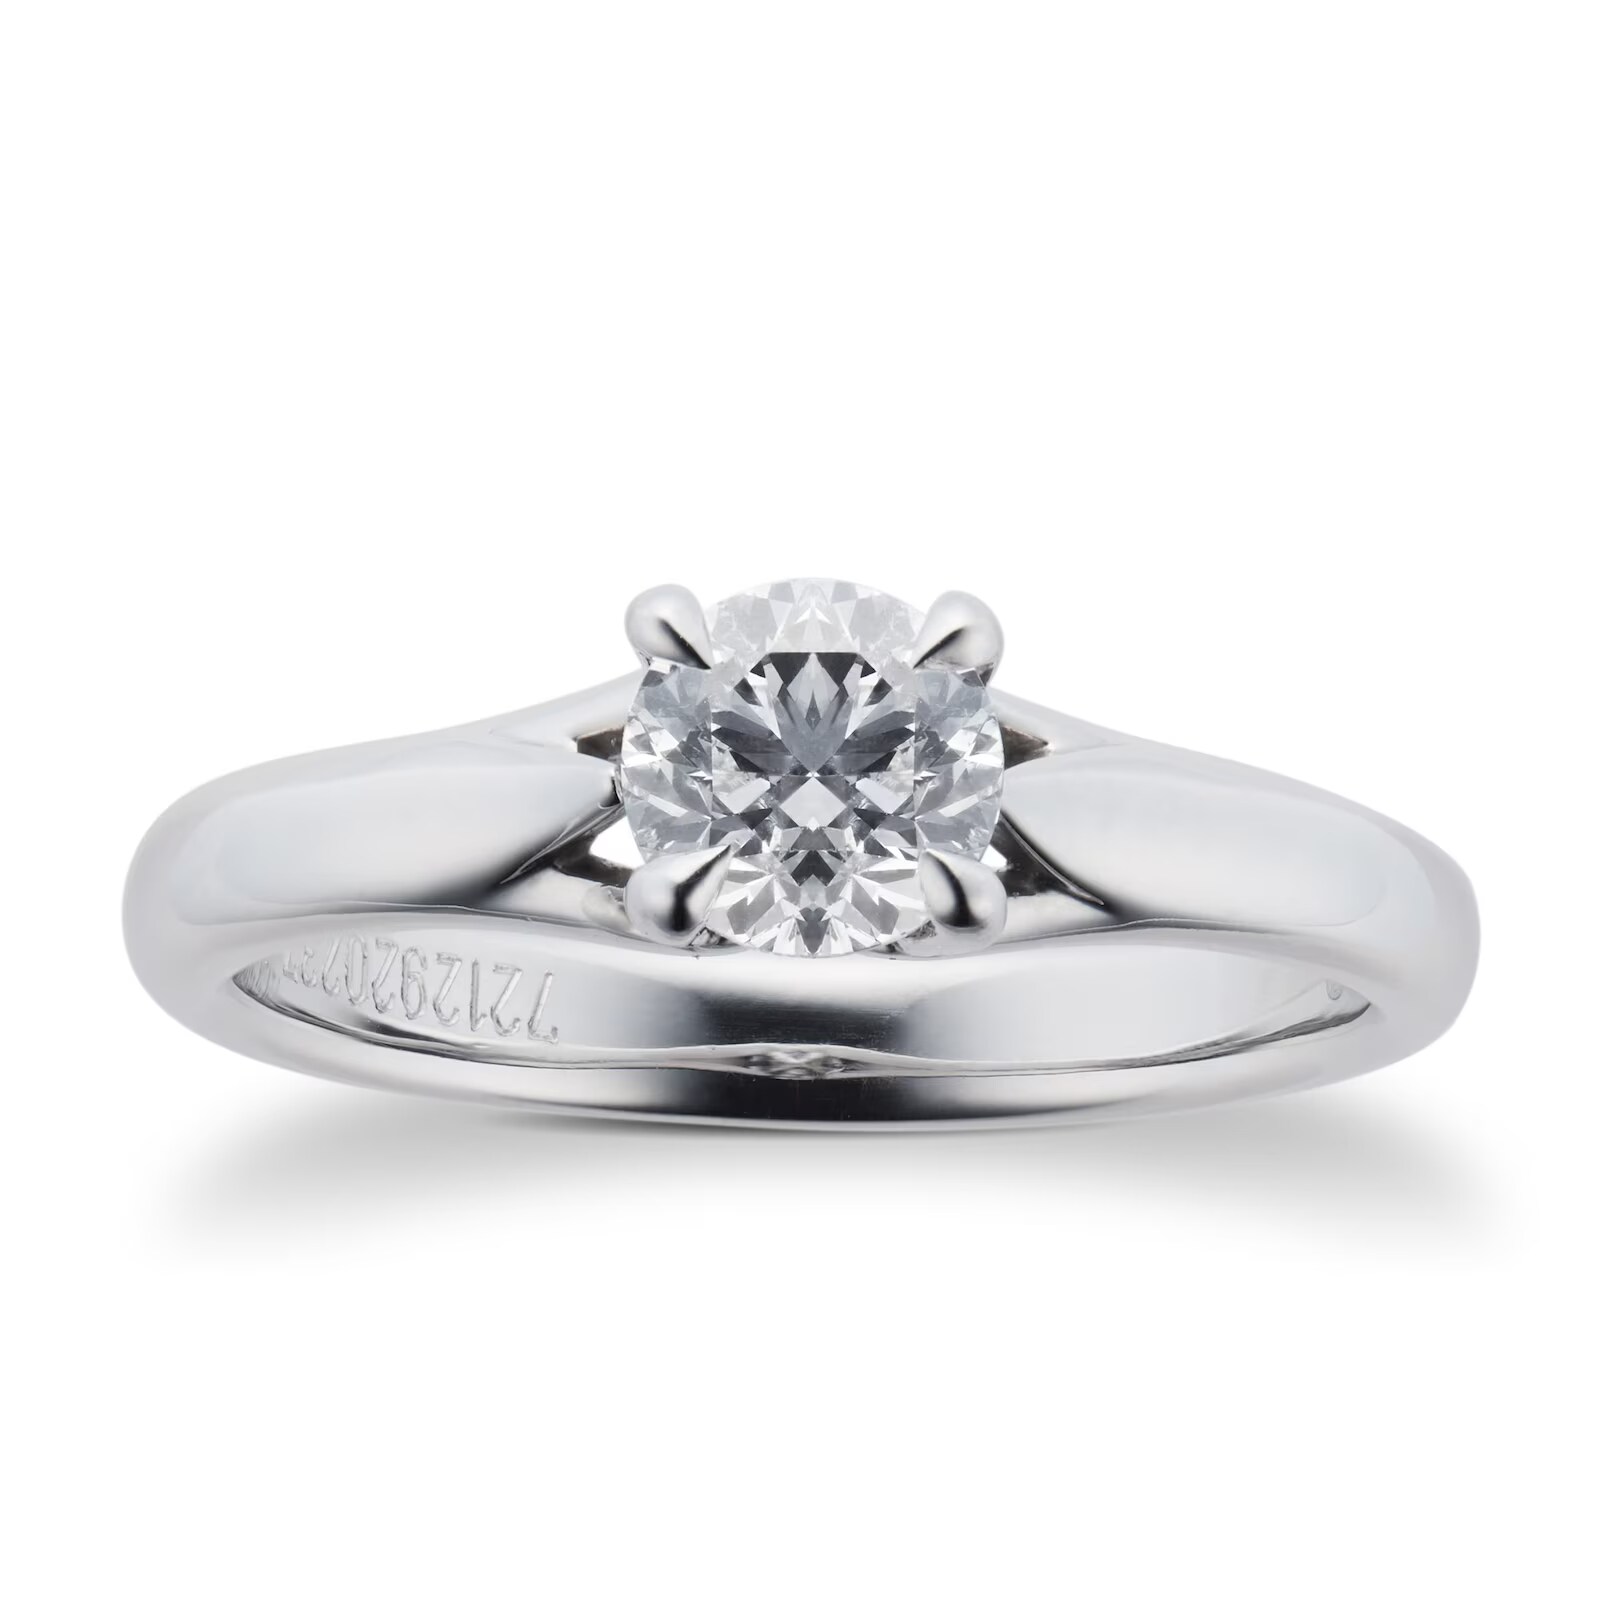 Ena Harkness Engagement Ring 0.70 Carat - Ring Size L